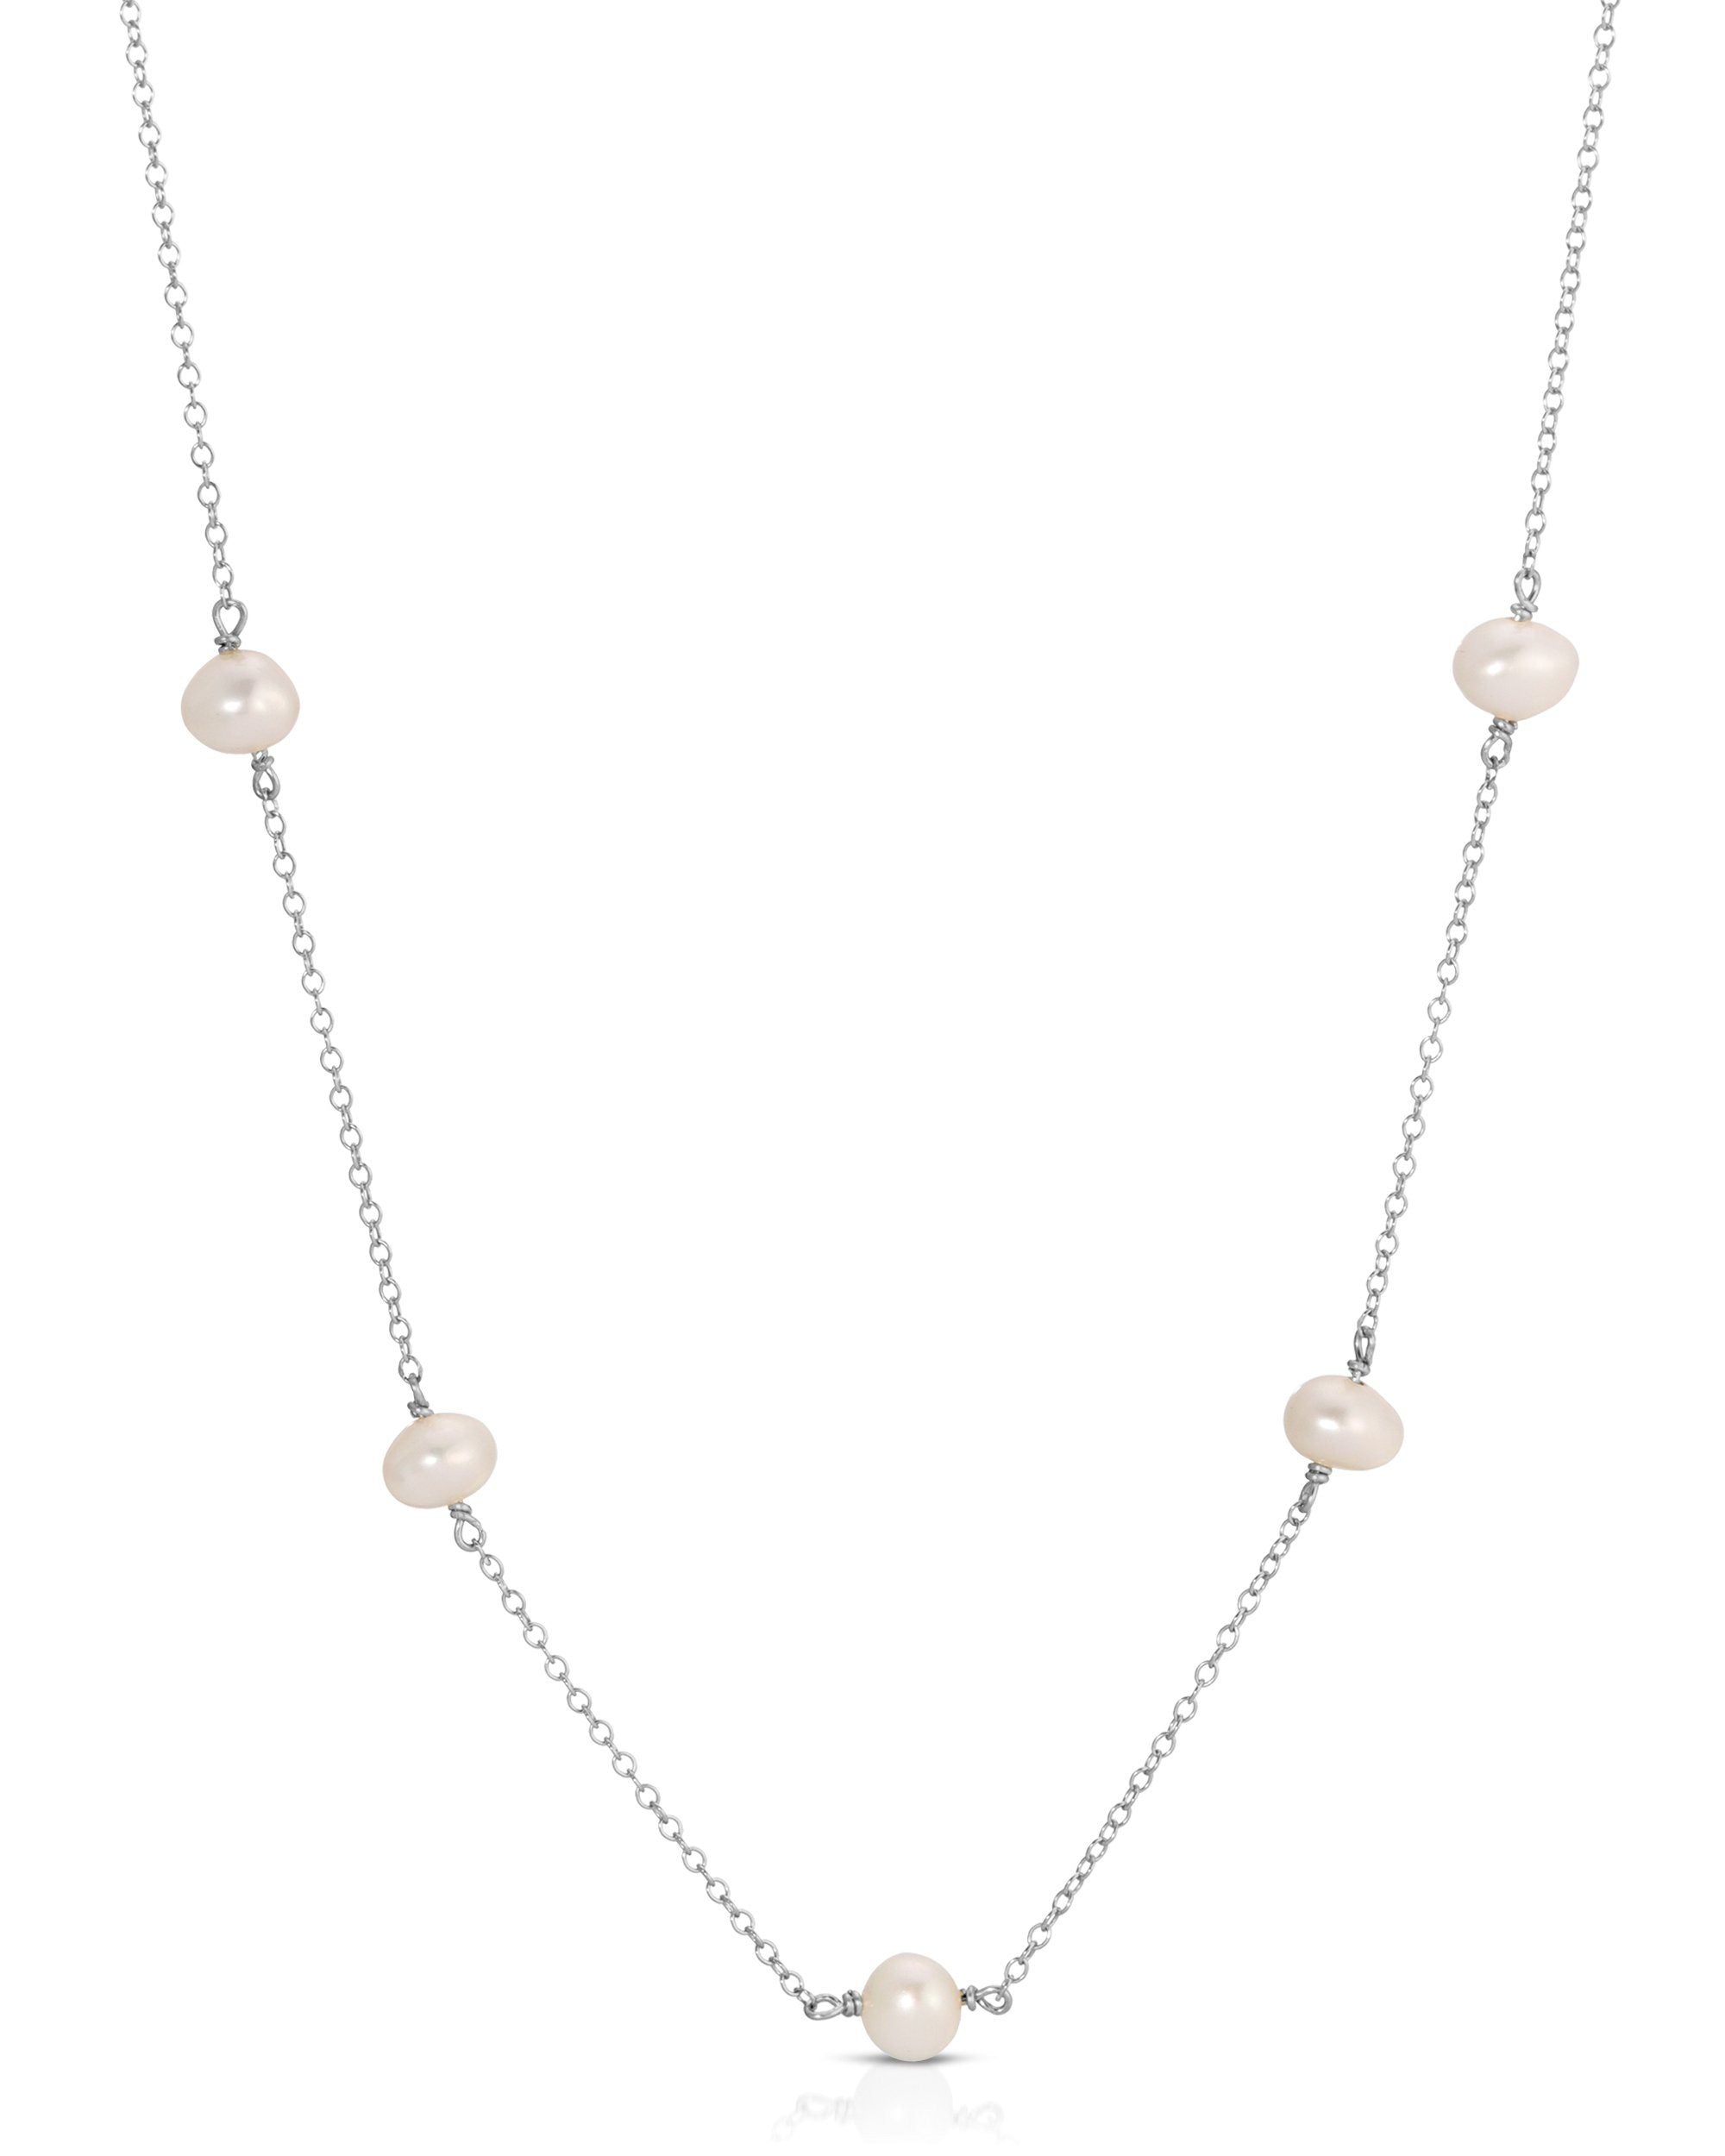 Lajos Necklace by KOZAKH. A 16 to 18 inch adjustable length necklace, crafted in Sterling Silver, featuring irregular white freshwater Pearls.